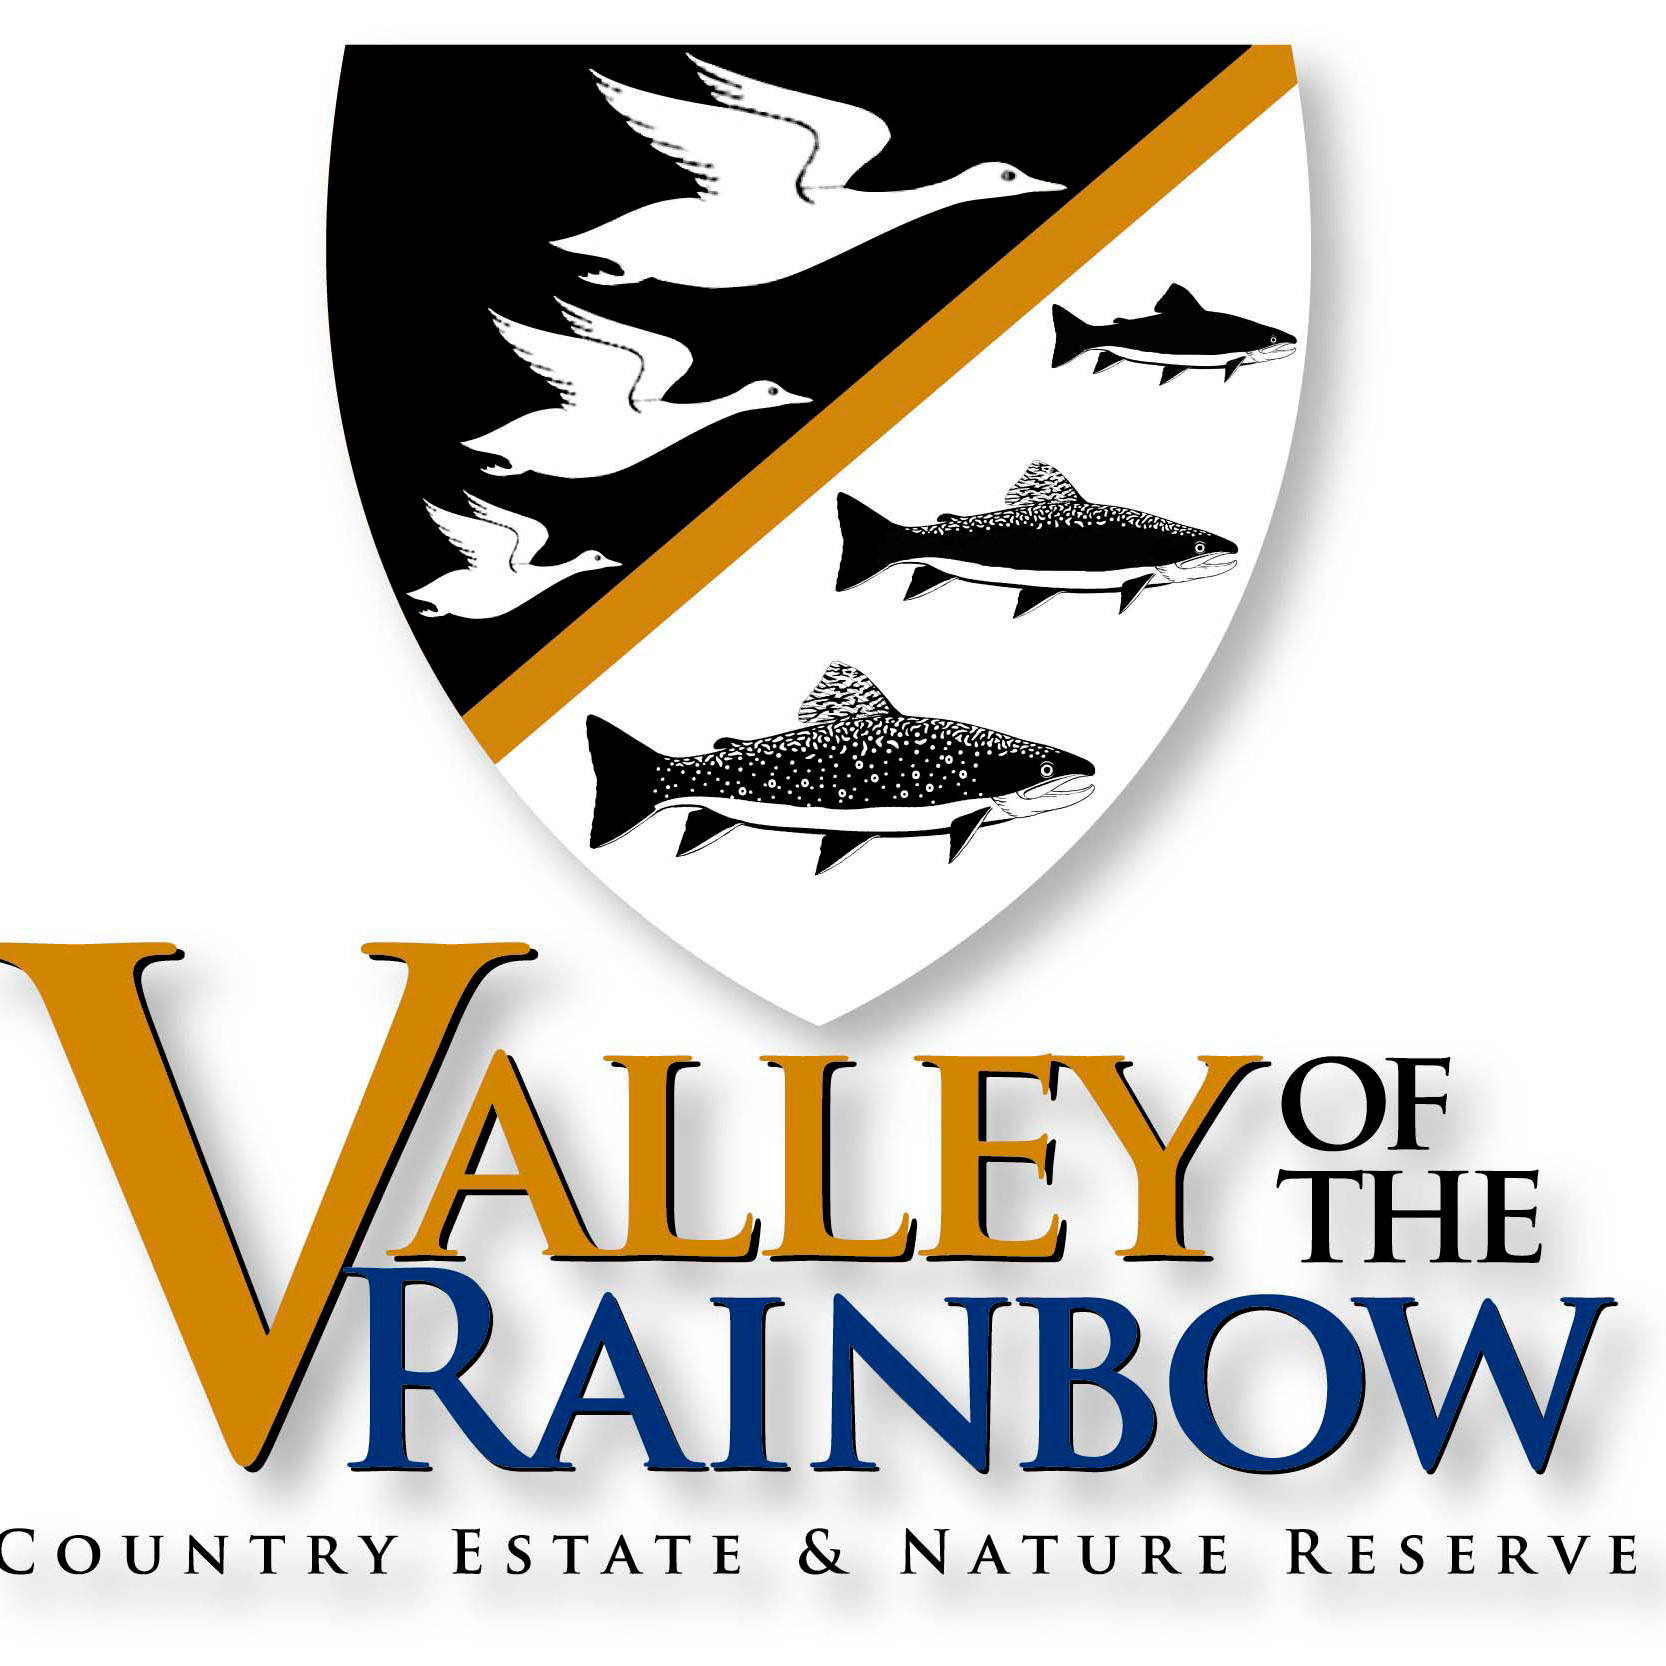 Accommodation and Fly Fishing Retreat in Dullstroom - Valley of the Rainbow